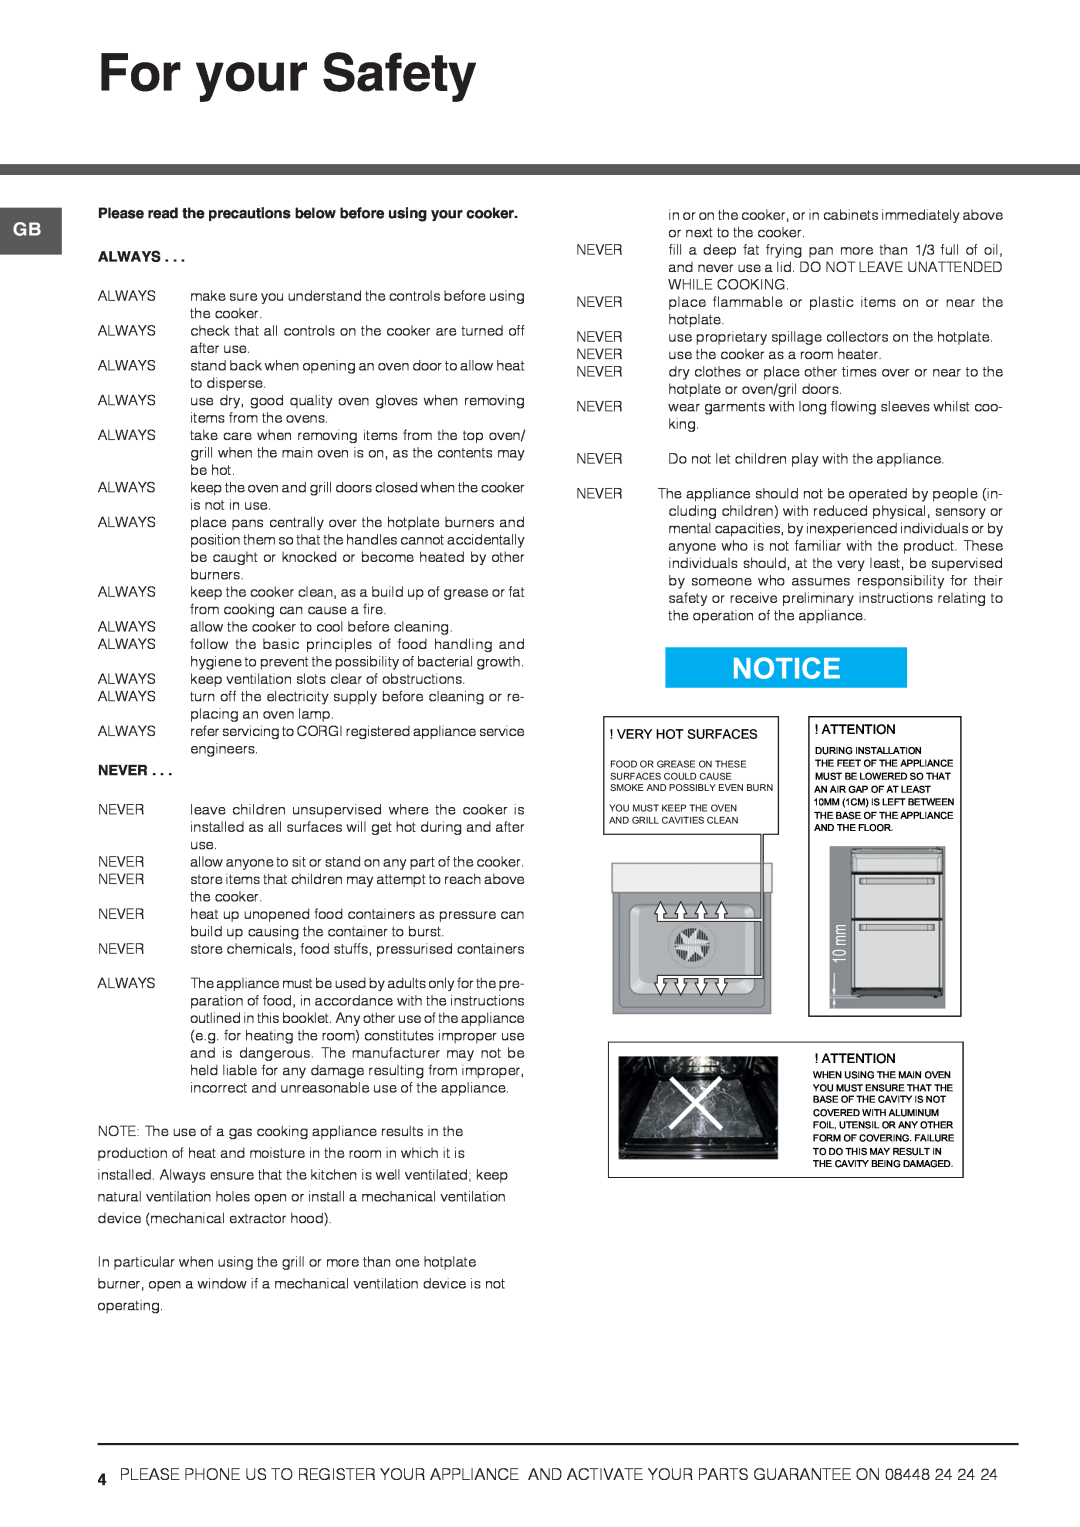 Hotpoint HAGL 51 K, HAGL 51 P, 50cm Gas Cooker installation instructions For your Safety, Always, Never 